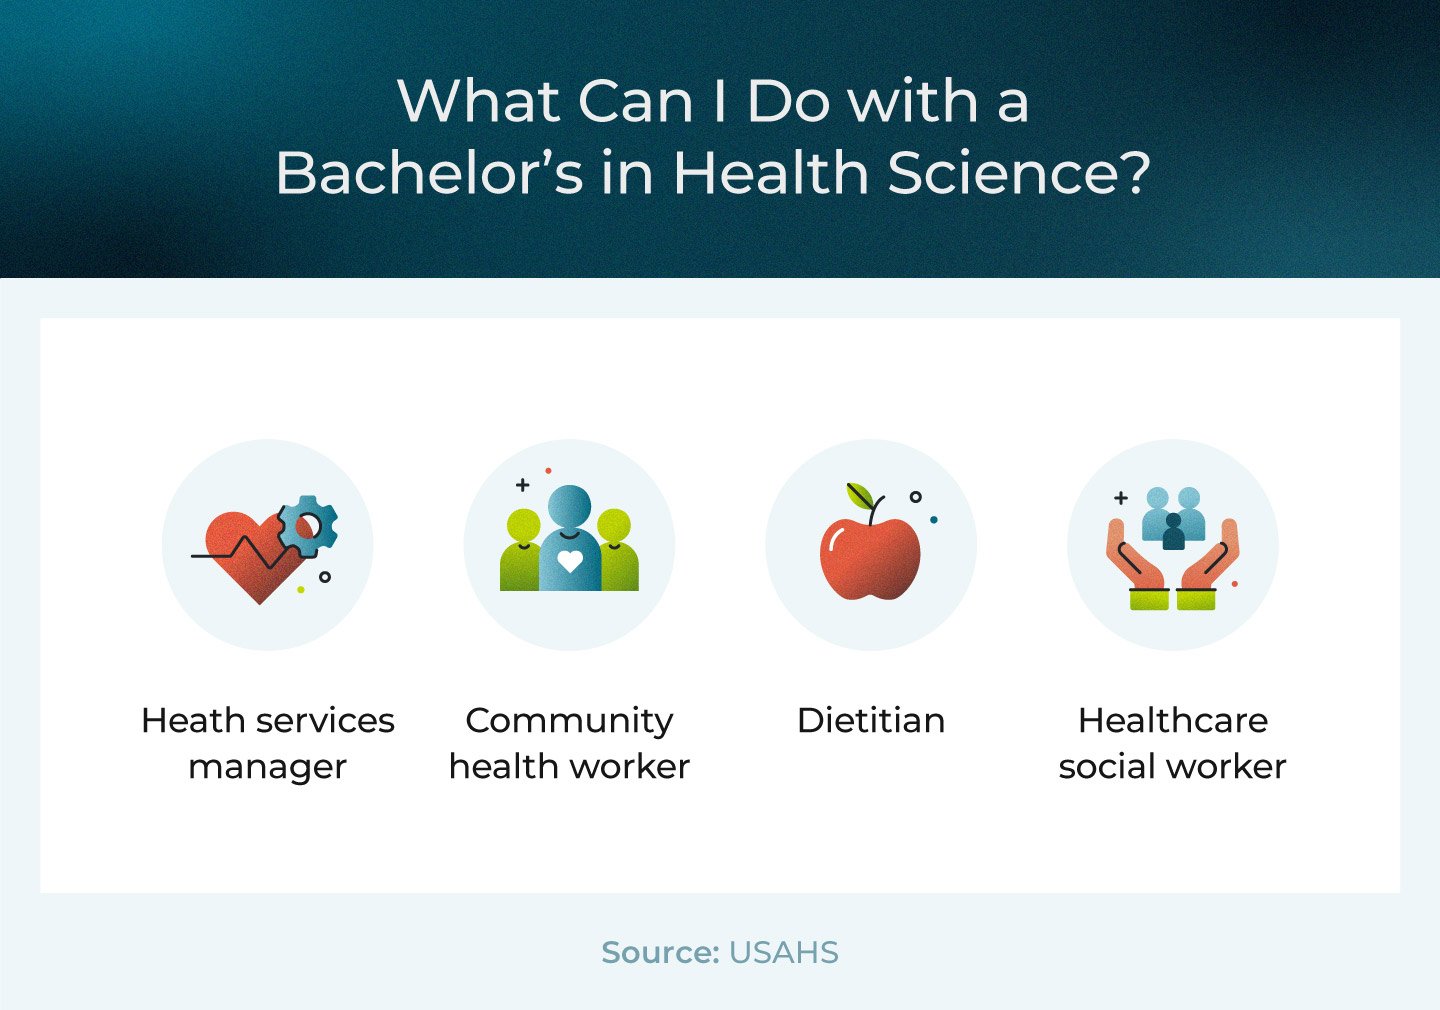 What you can do with a bachelor's degree in health sciences.